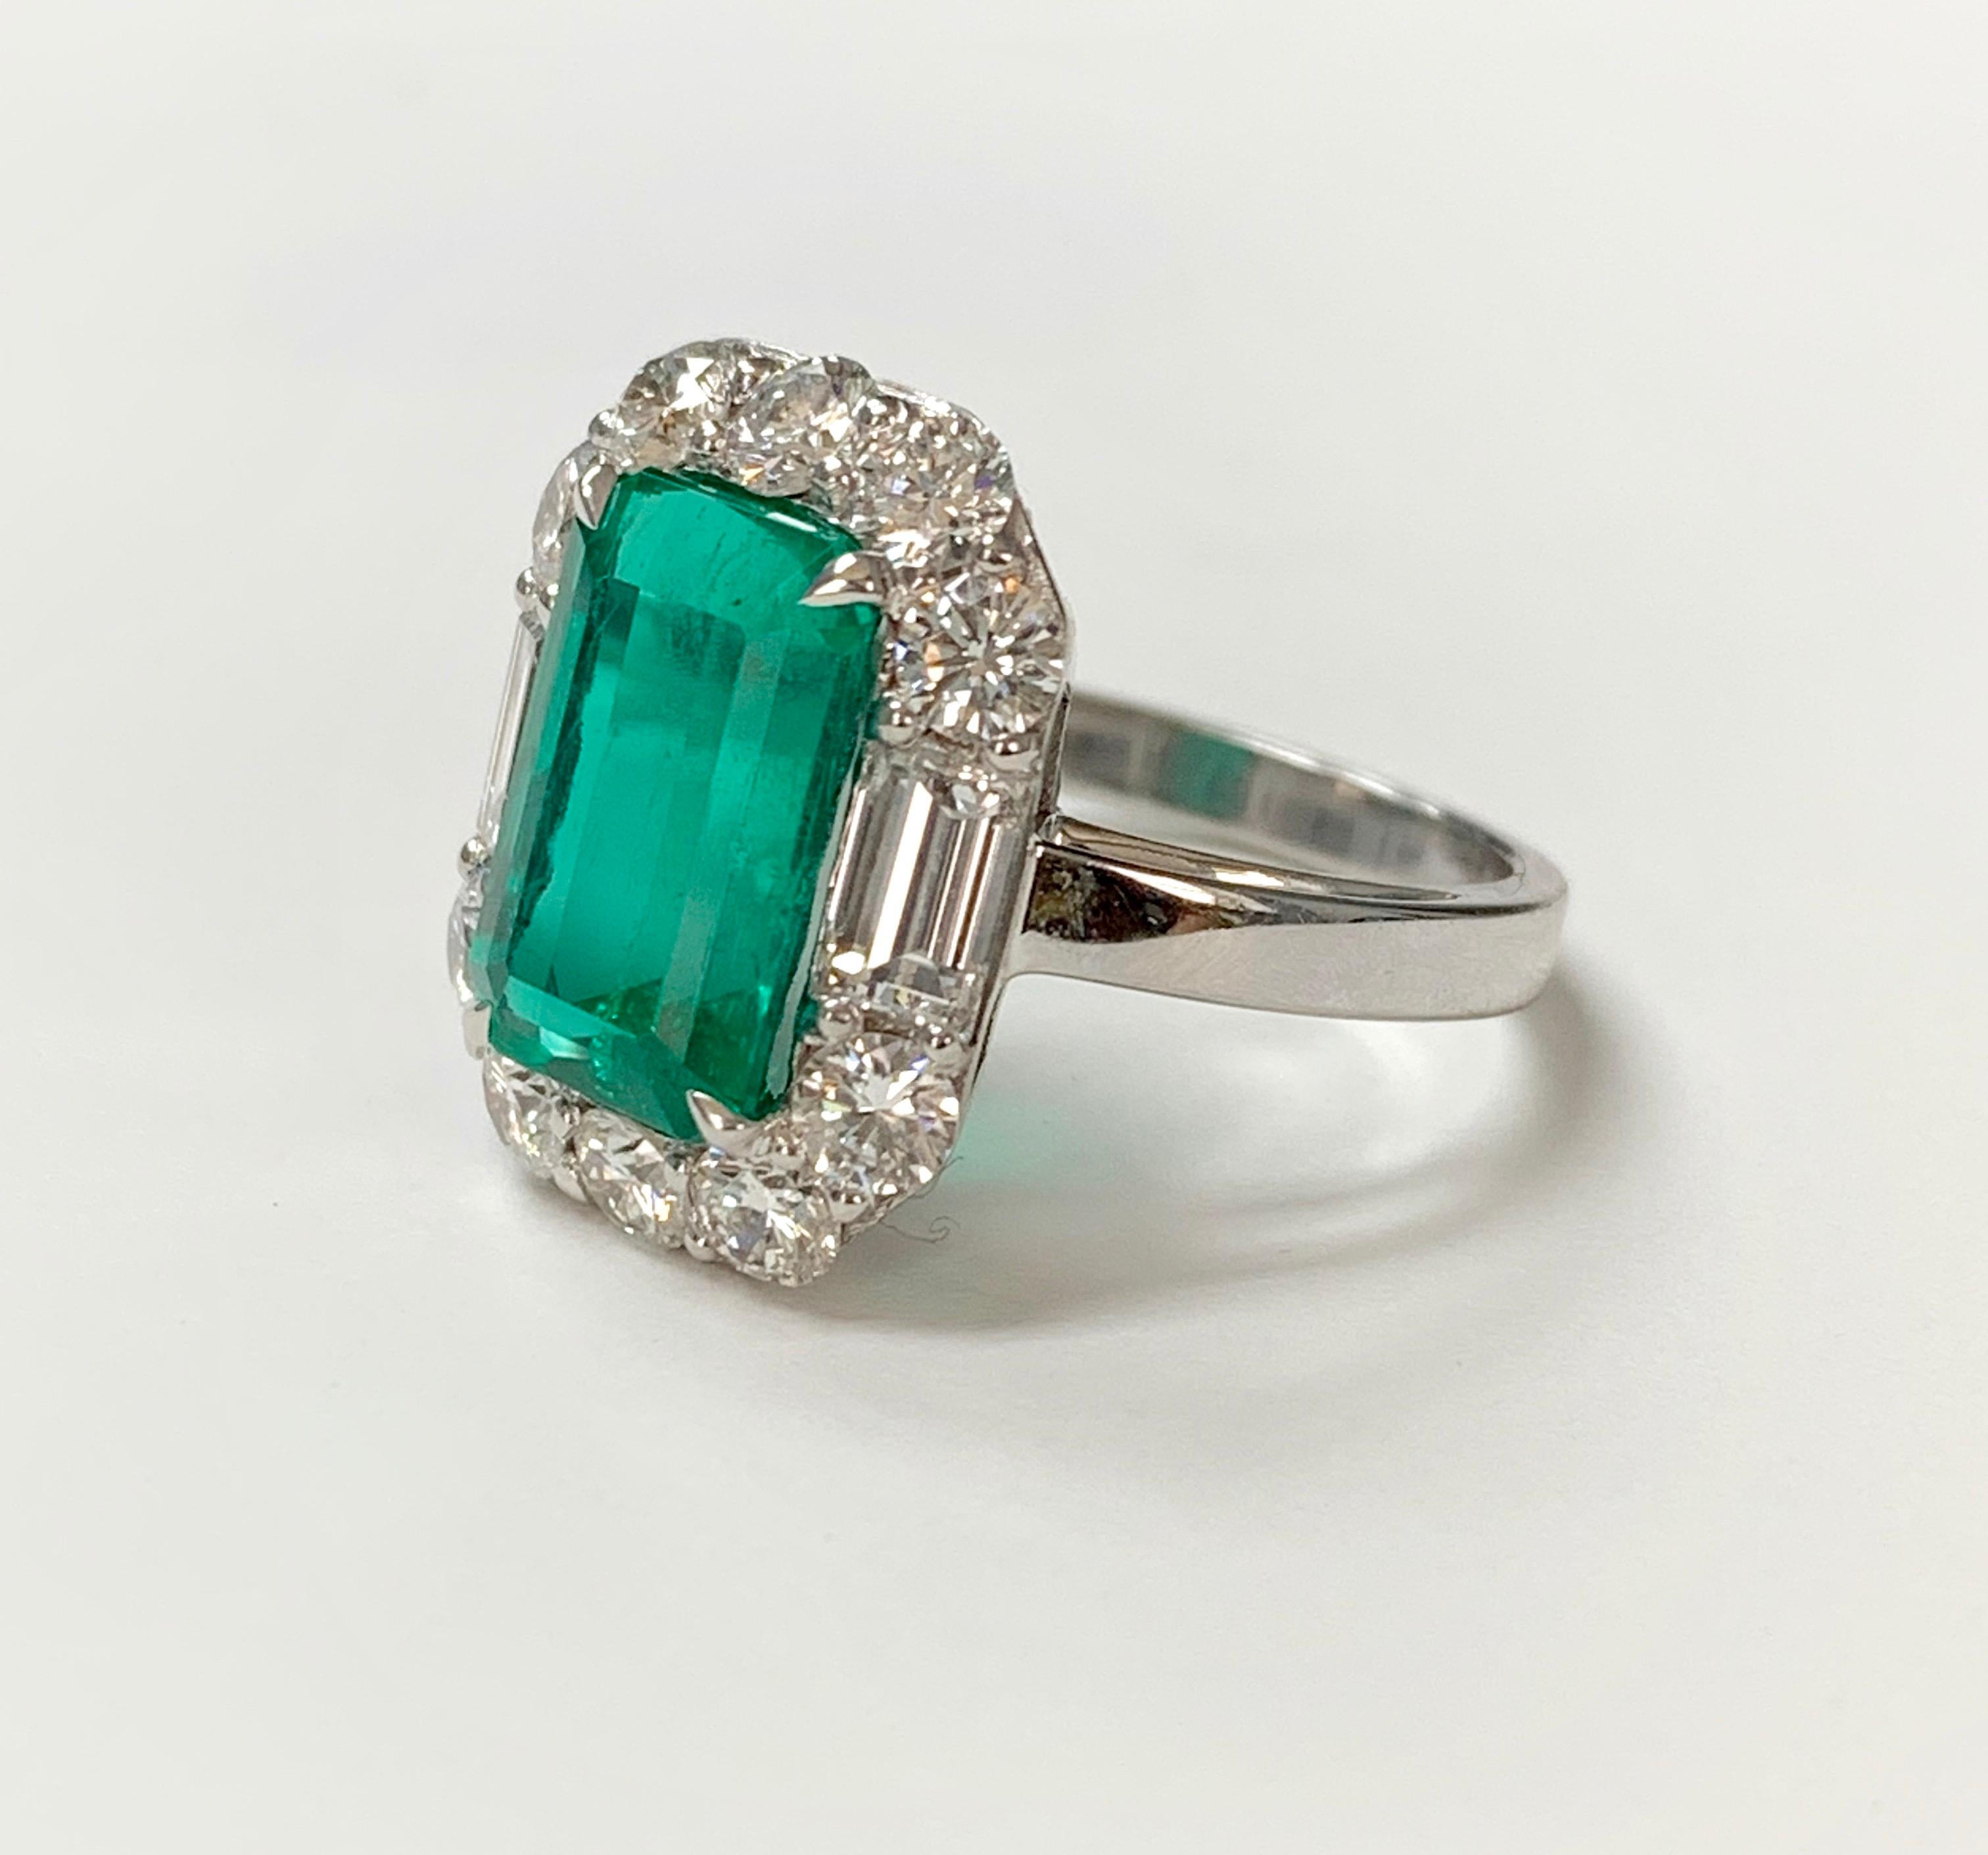 GIA Certified 3.63 Carat Colombian Emerald and Diamond Ring in 18k White Gold 1